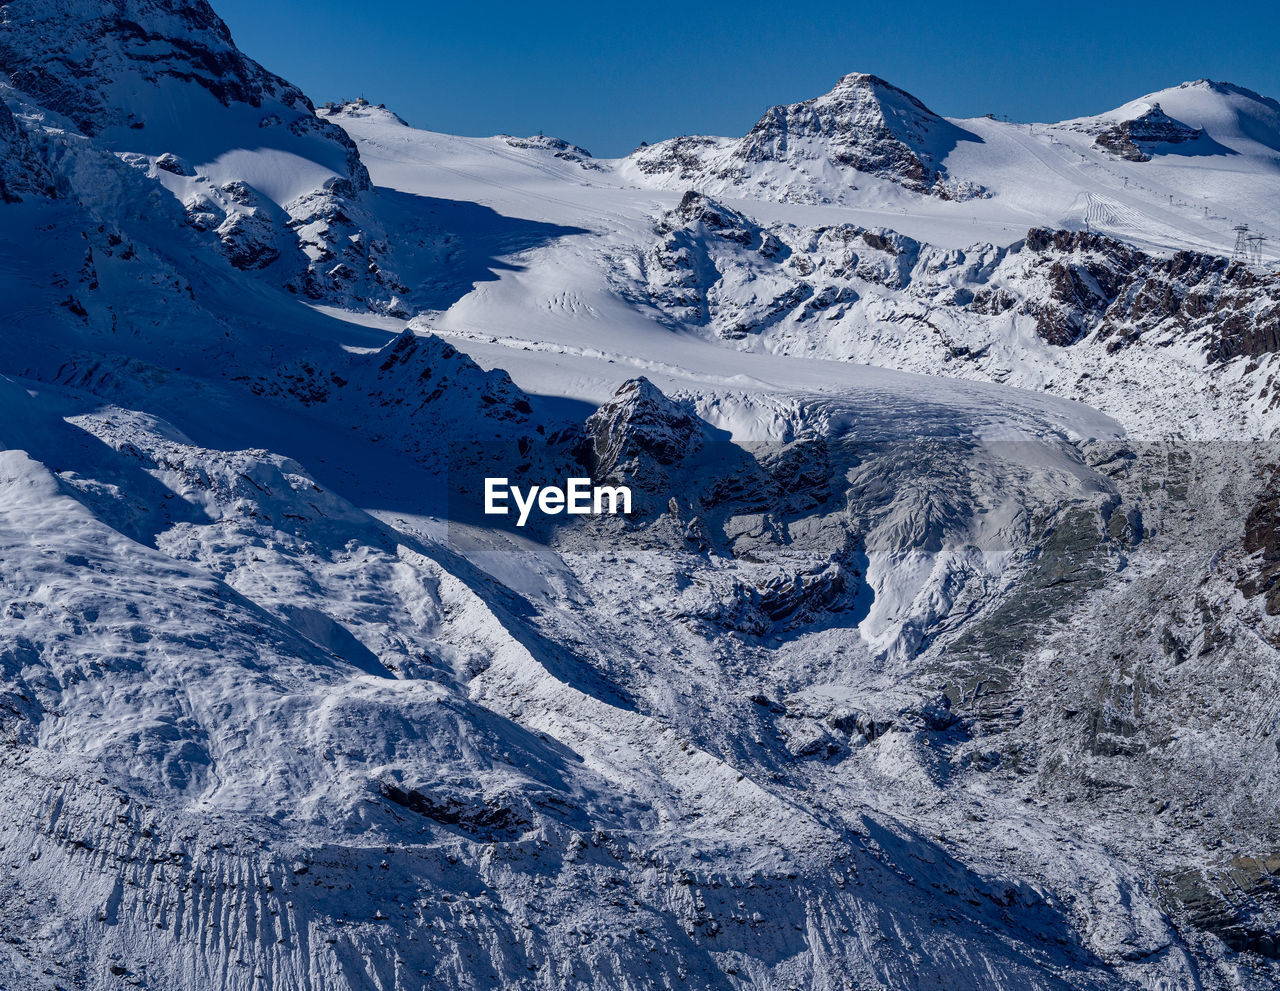 Scenic view of a glacier and snowcapped mountains against sky